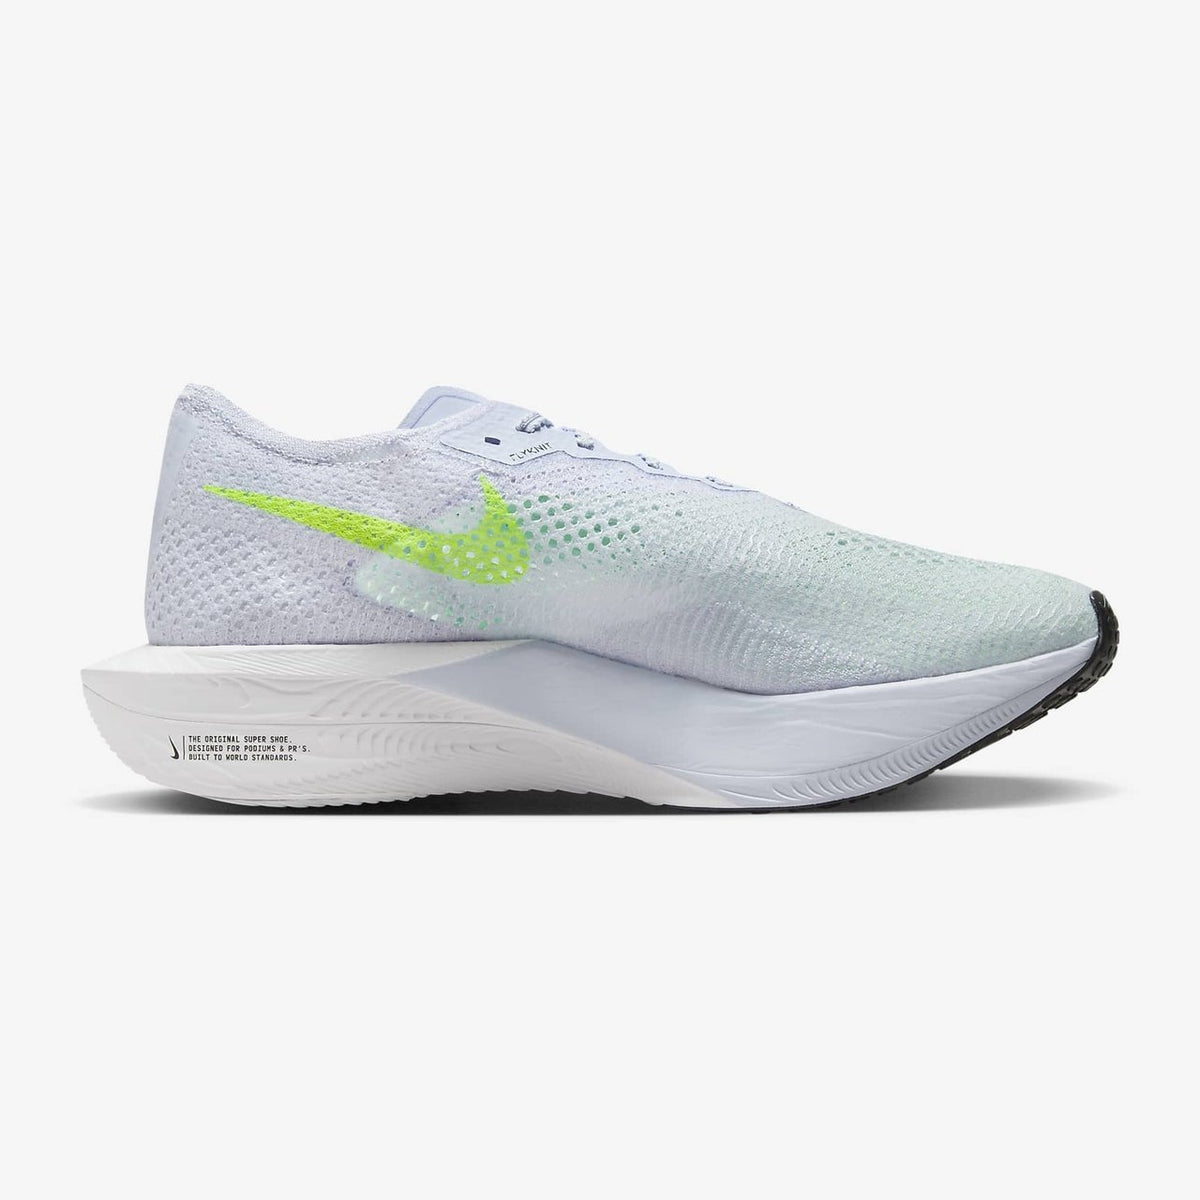 Nike ZoomX Vaporfly Next% 3 Mens FOOTWEAR - Mens Carbon Plate FOOTBALL GREY/RACER BLUE